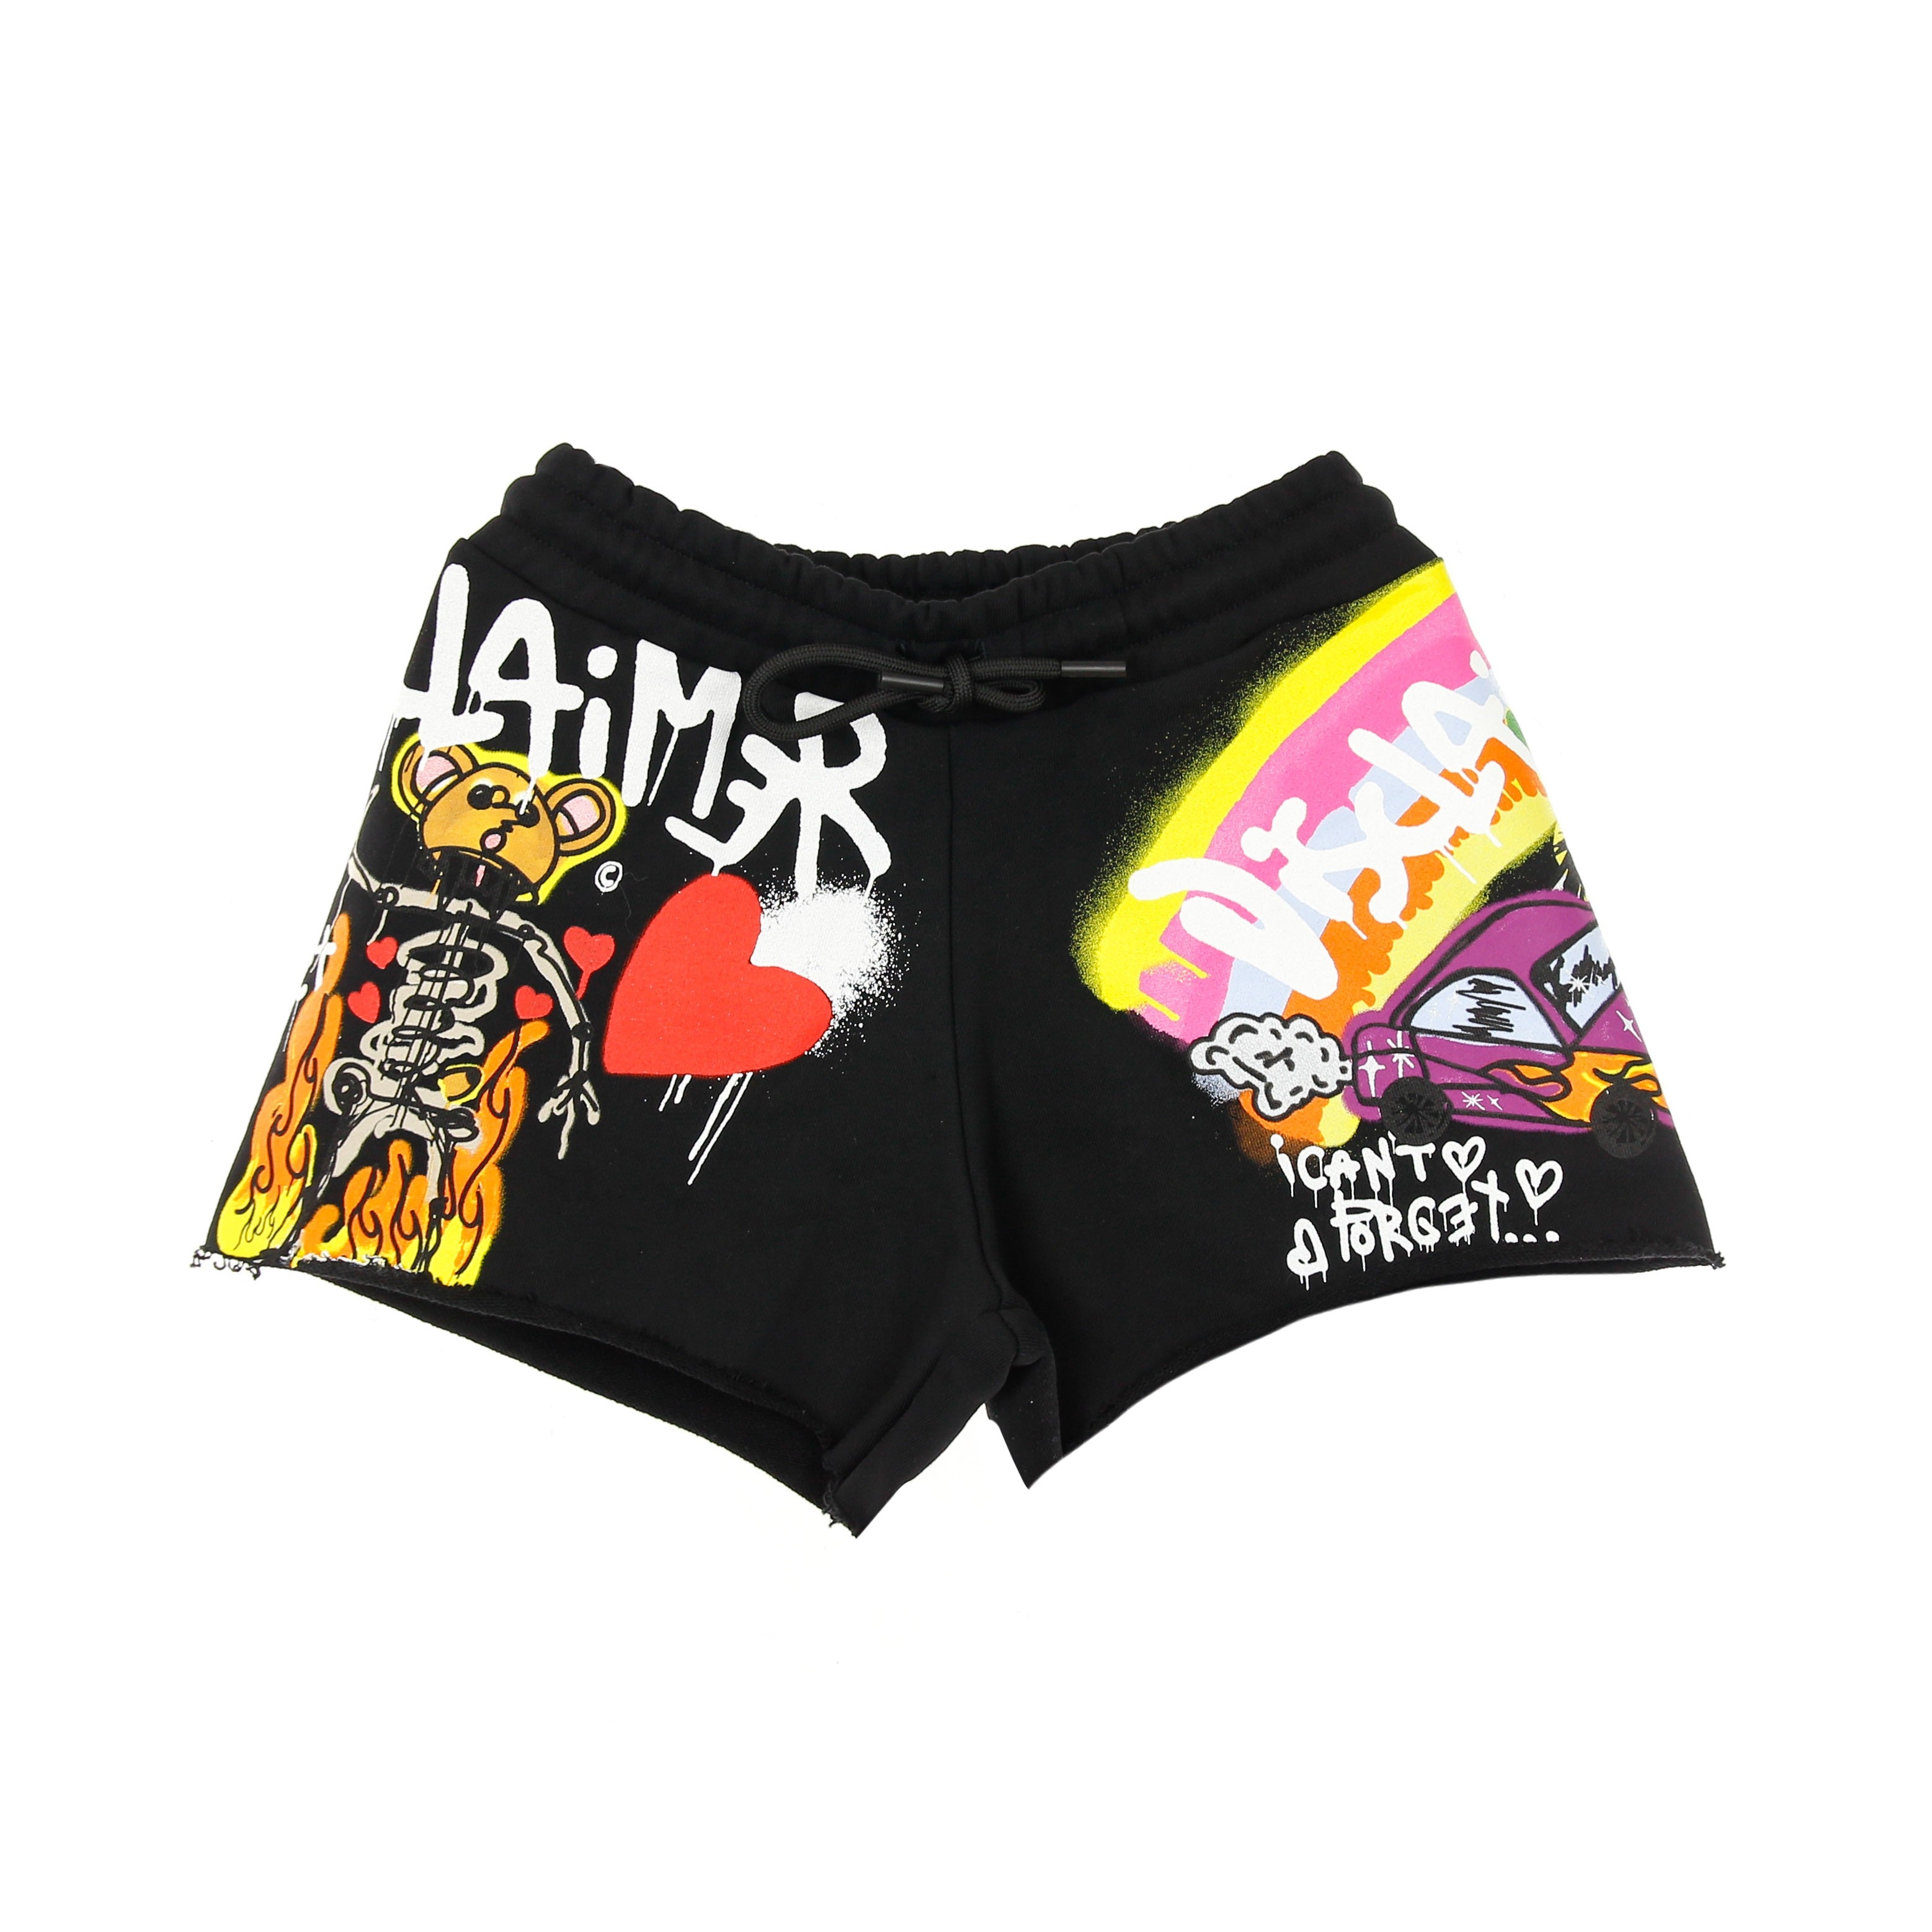 Women's Shorts I Can't Forget Shorts Black